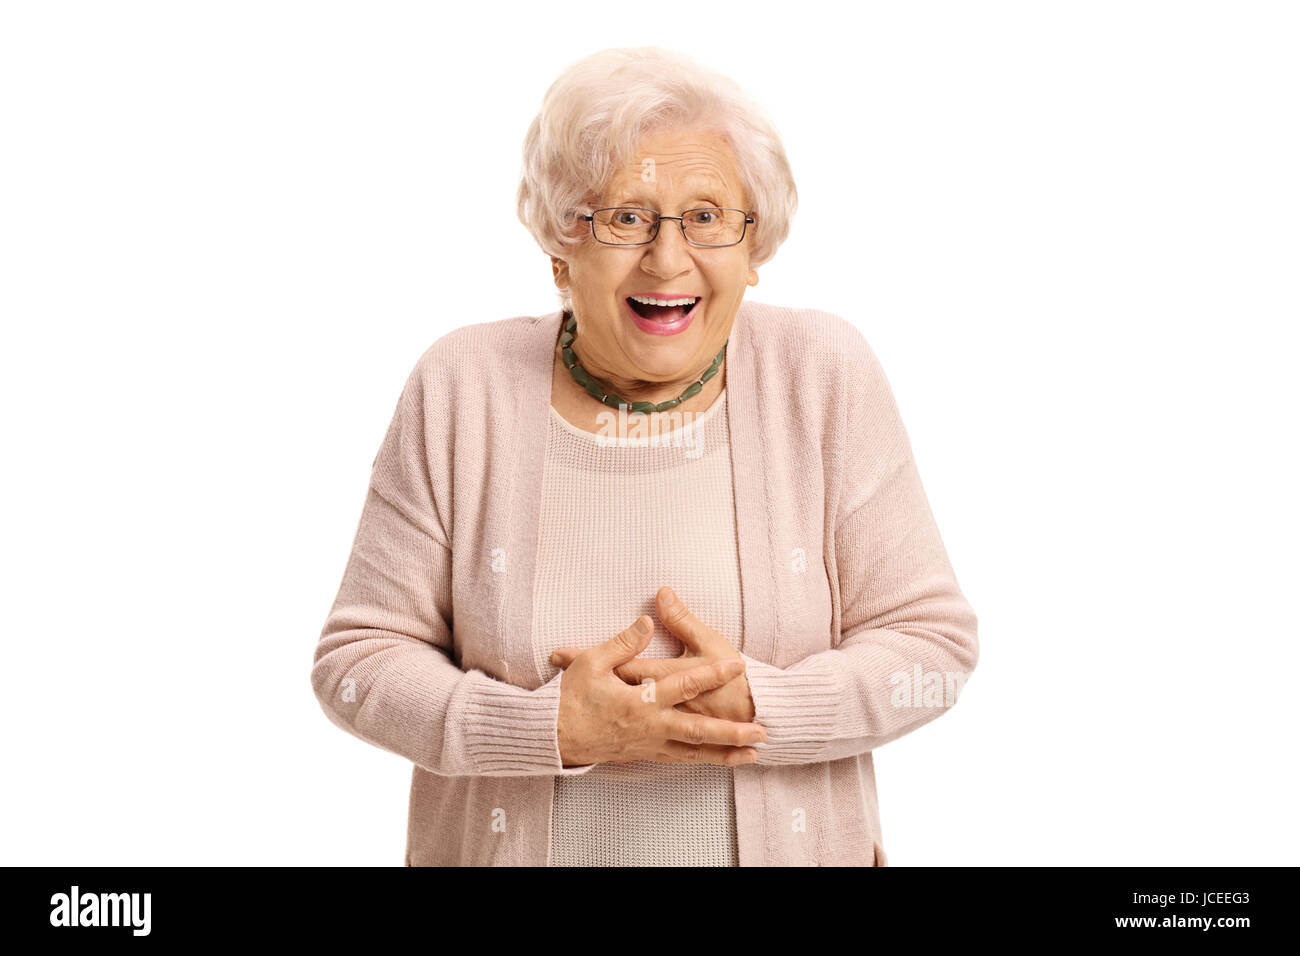 Surprised elderly woman looking at the camera and laughing